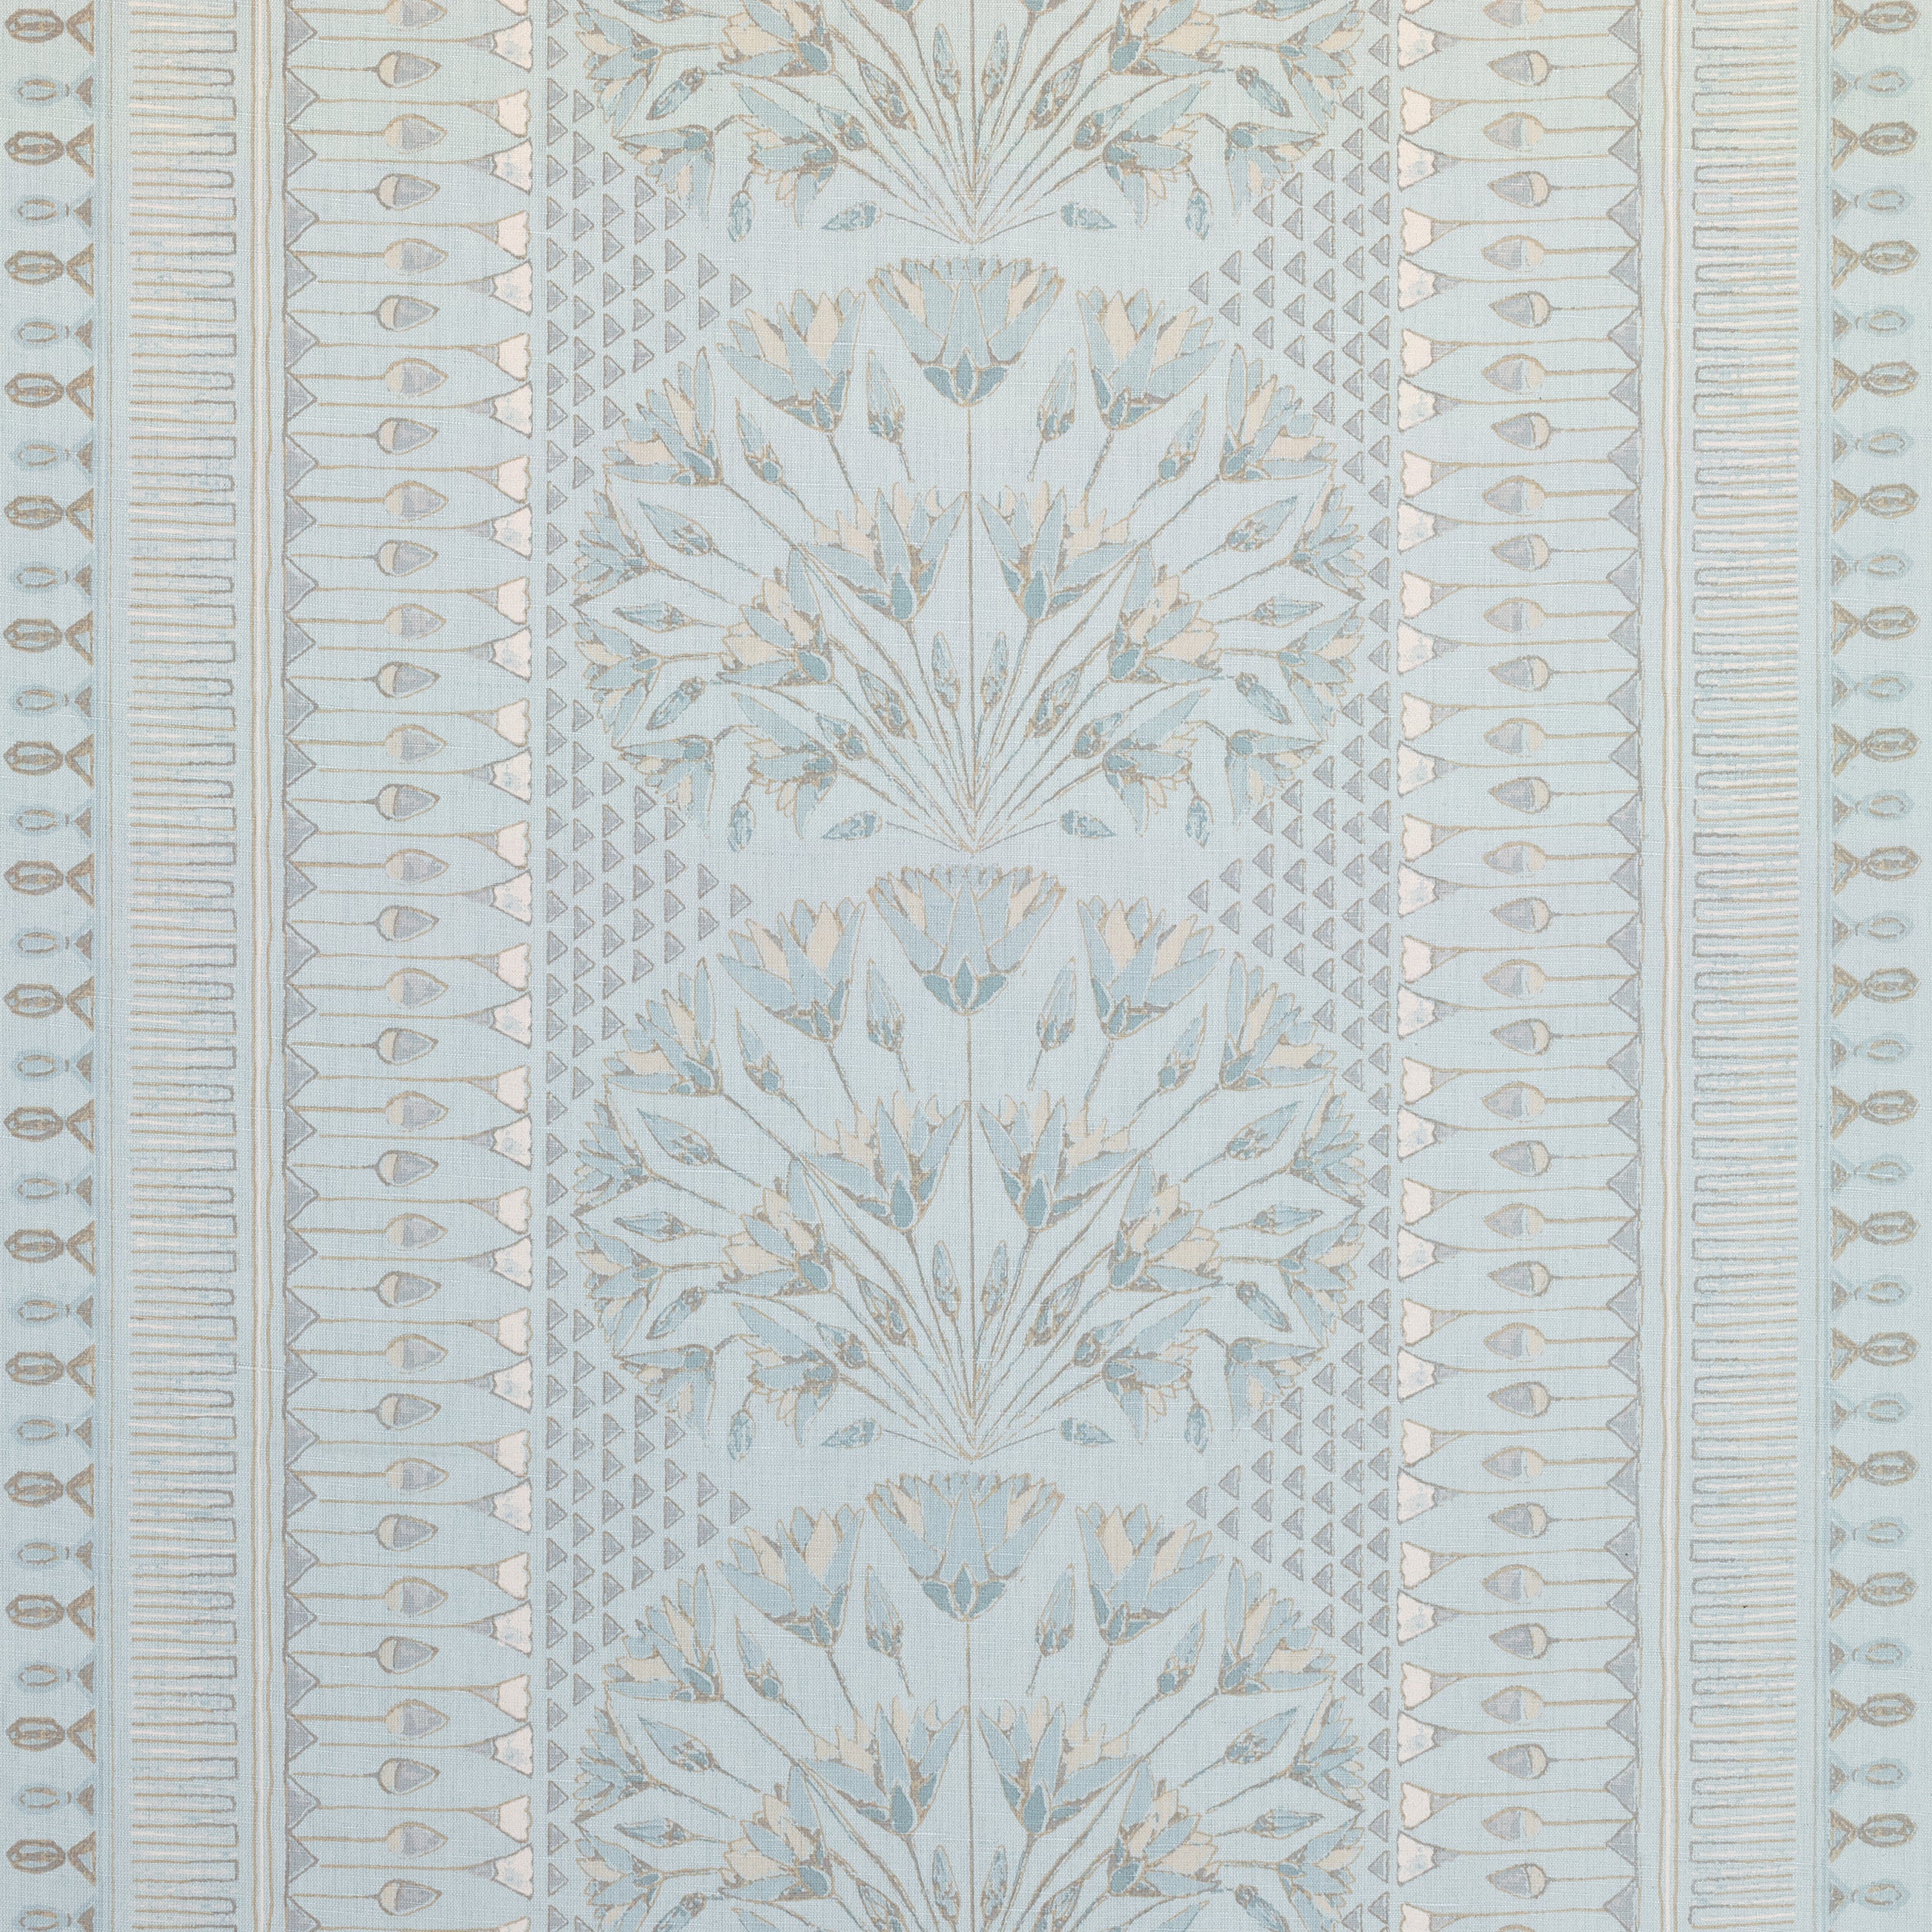 Cairo fabric in spa blue  color - pattern number AF9627 - by Anna French in the Savoy collection